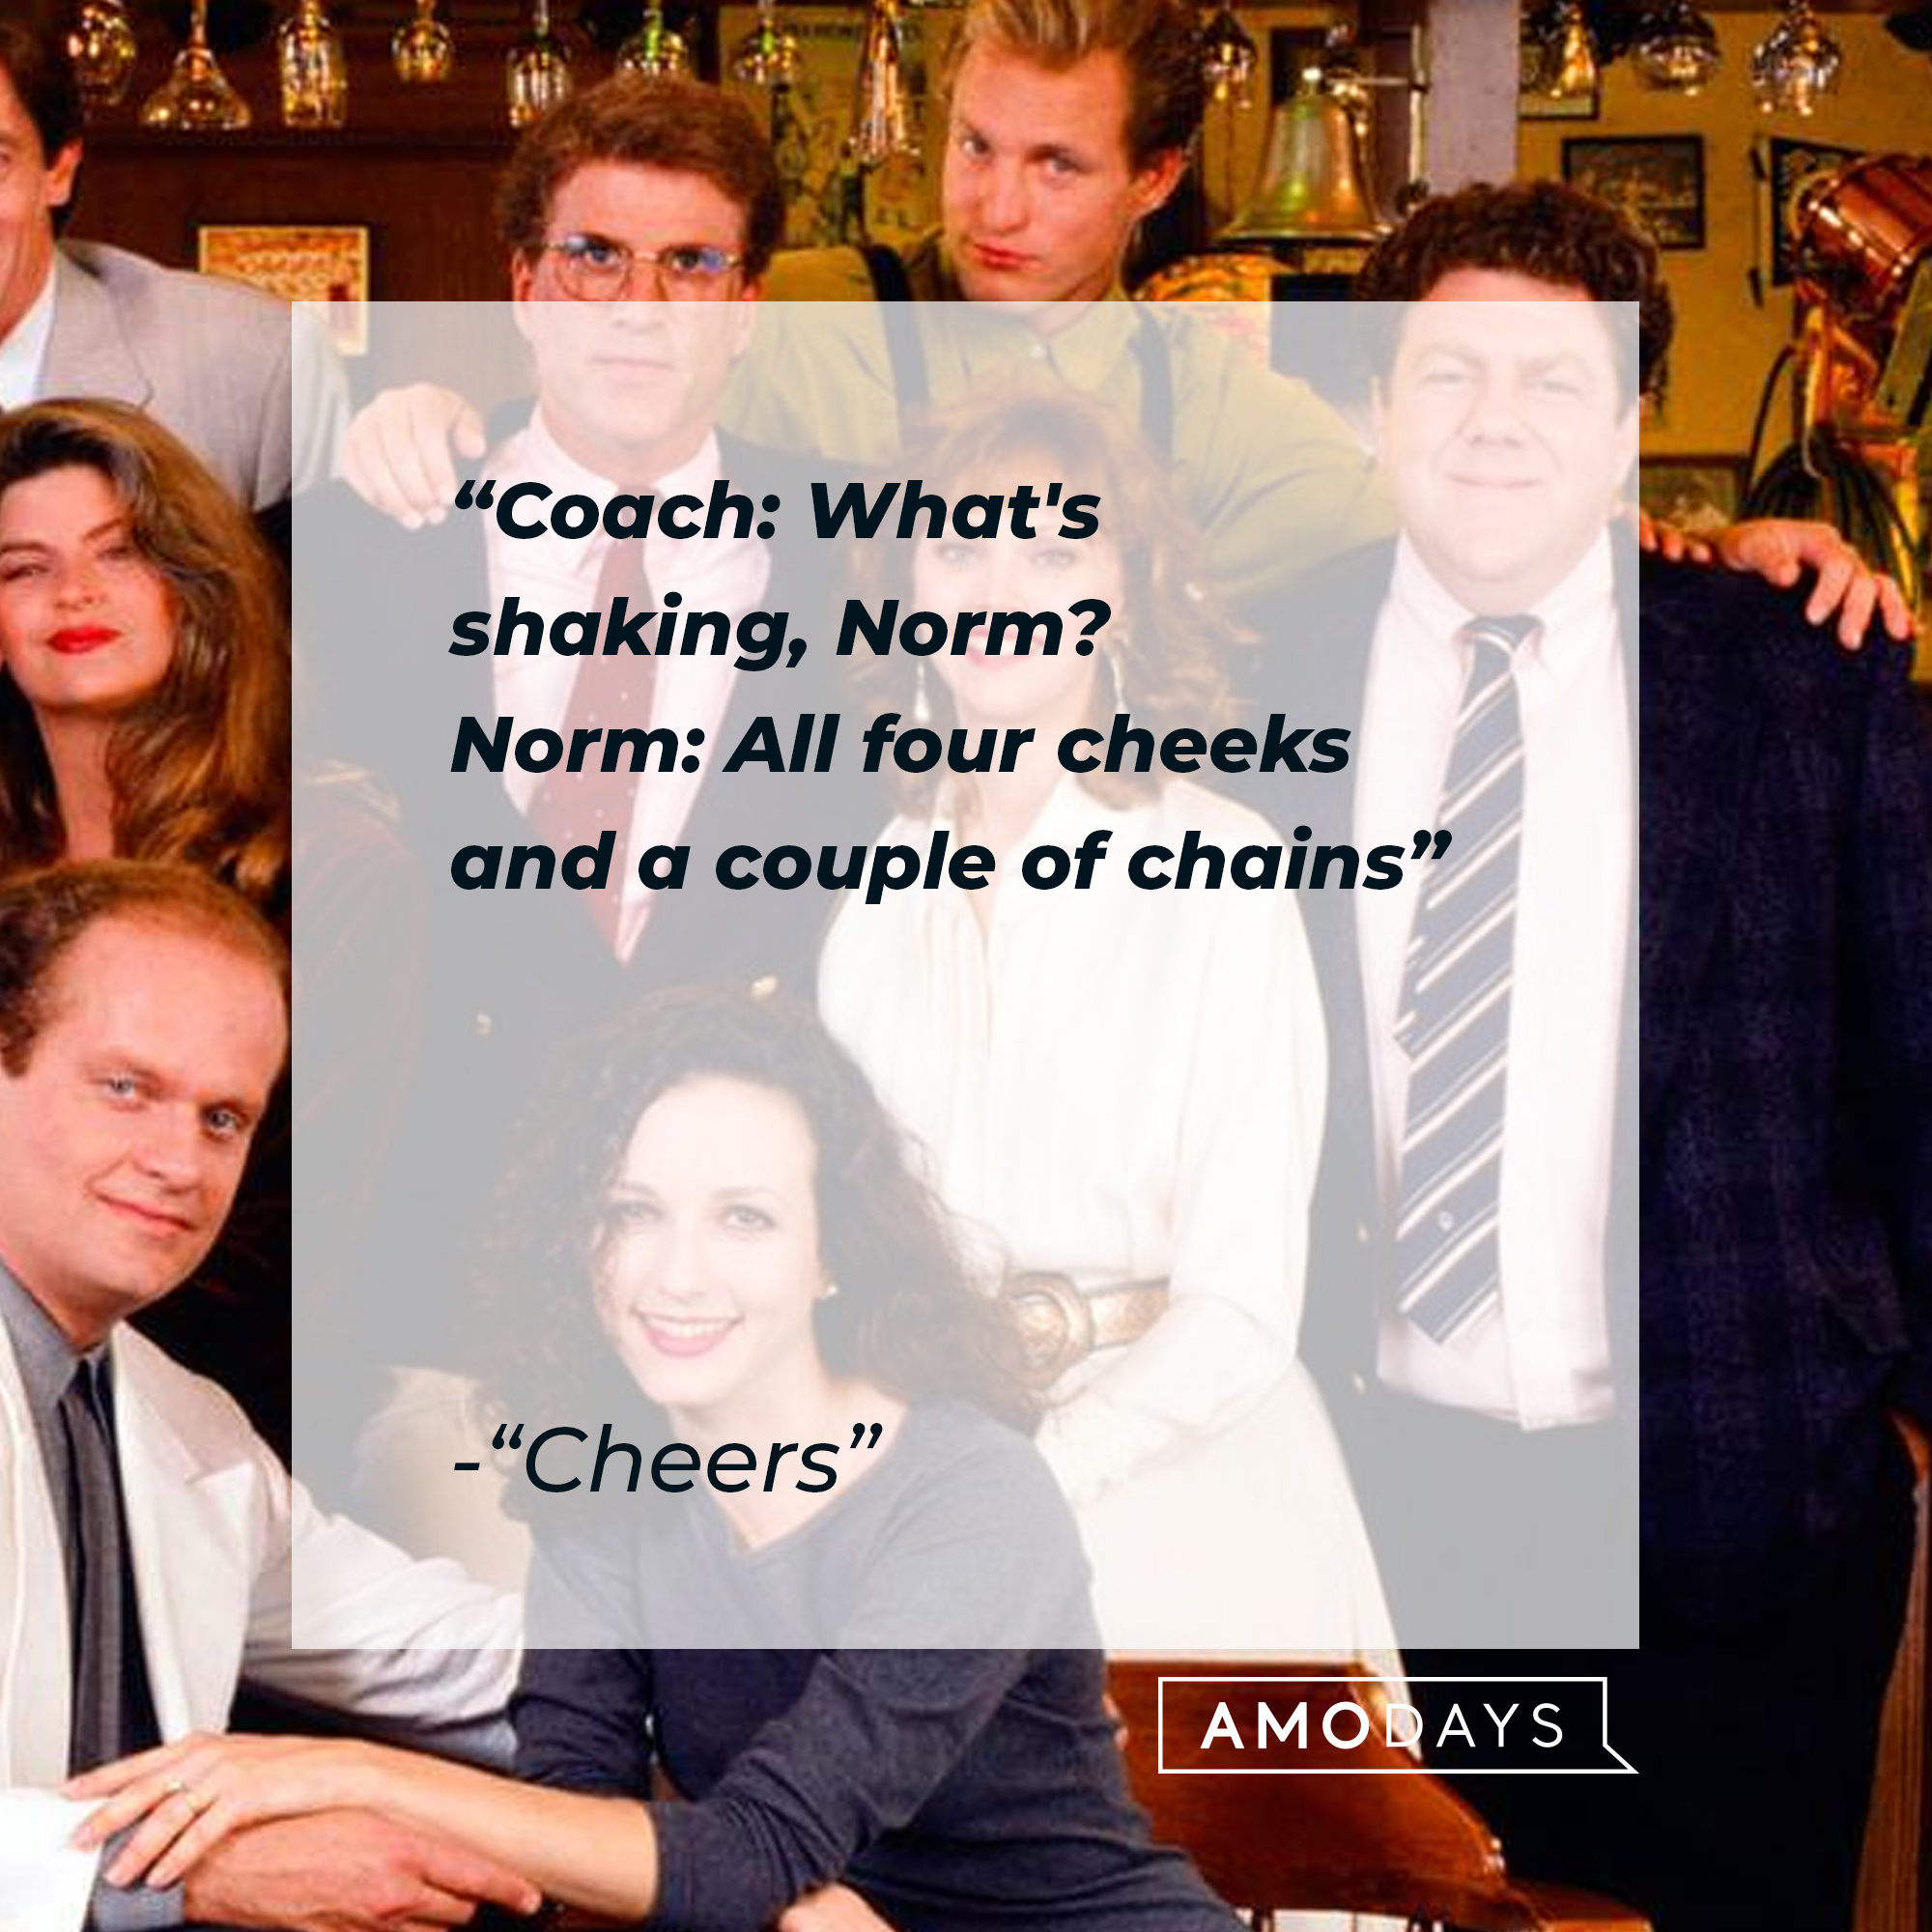 Norm Peterson with his quote: "Coach: What's shaking, Norm? ; Norm: All four cheeks and a couple of chains." | Source: Facebook.com/Cheers